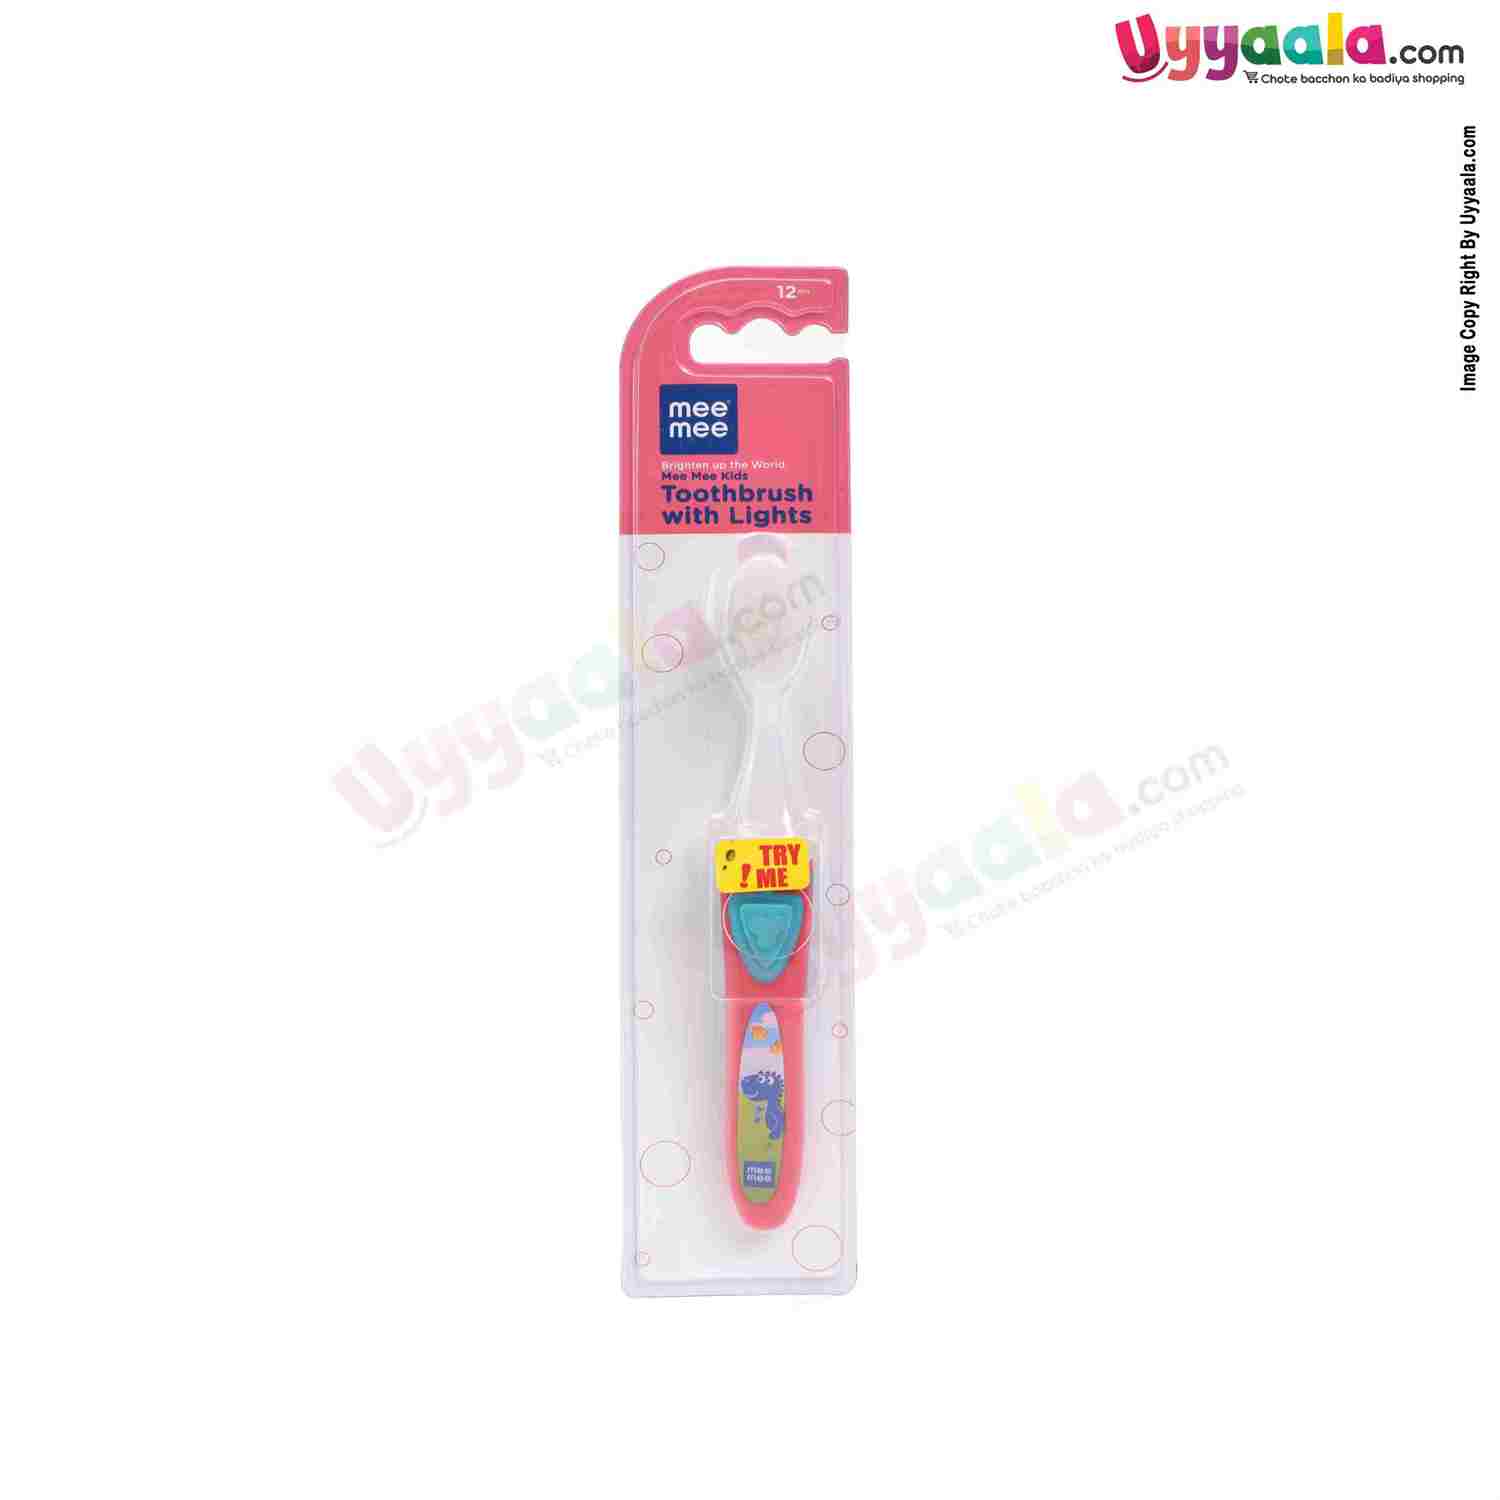 MEE MEE Extra soft Kids Toothbrush With Multiple colour Lights, 12m+ age, Red